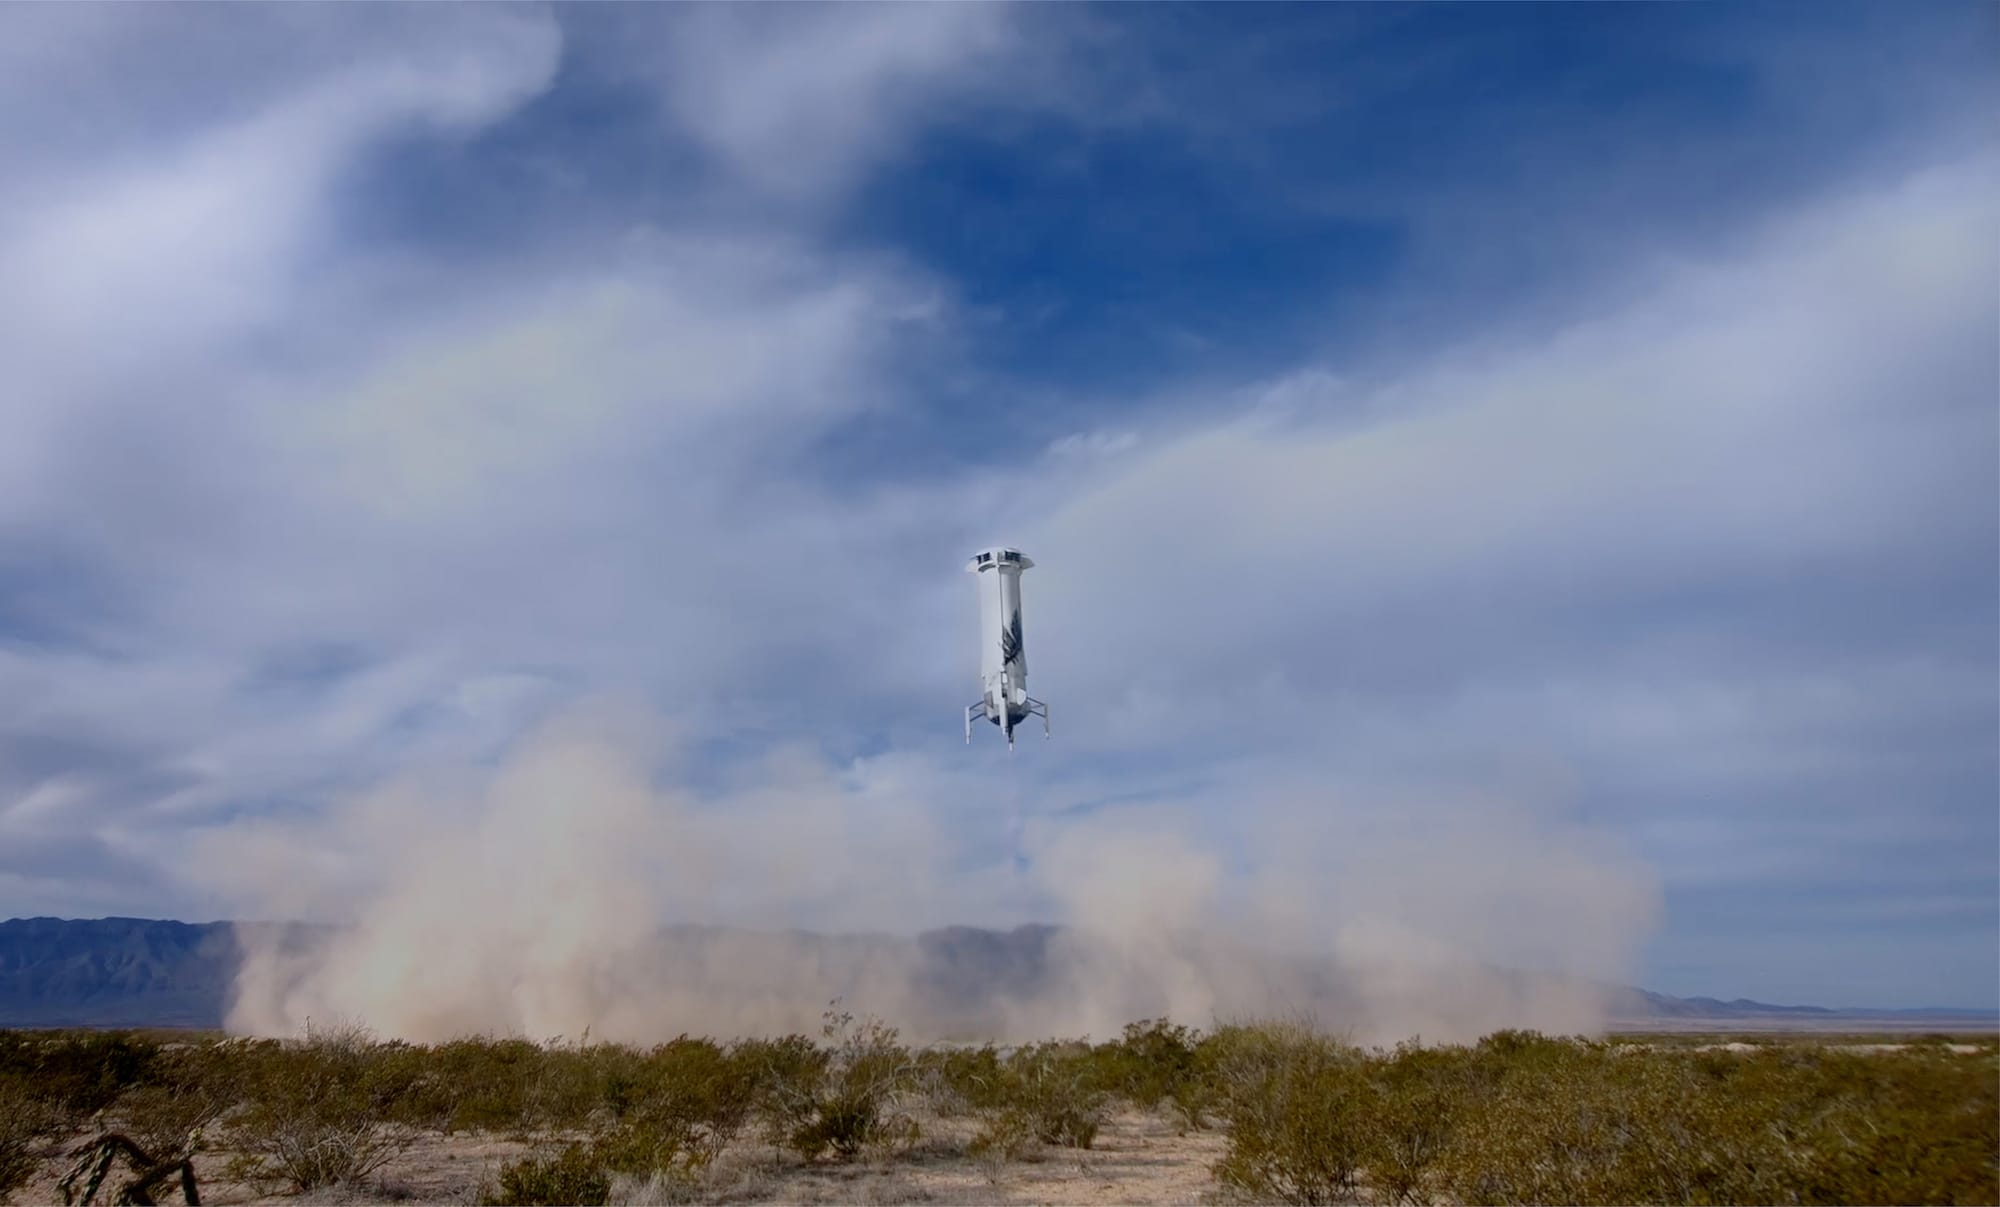 New Shepard's booster landing on the pad during the NS-24 mission. ©Blue Origin